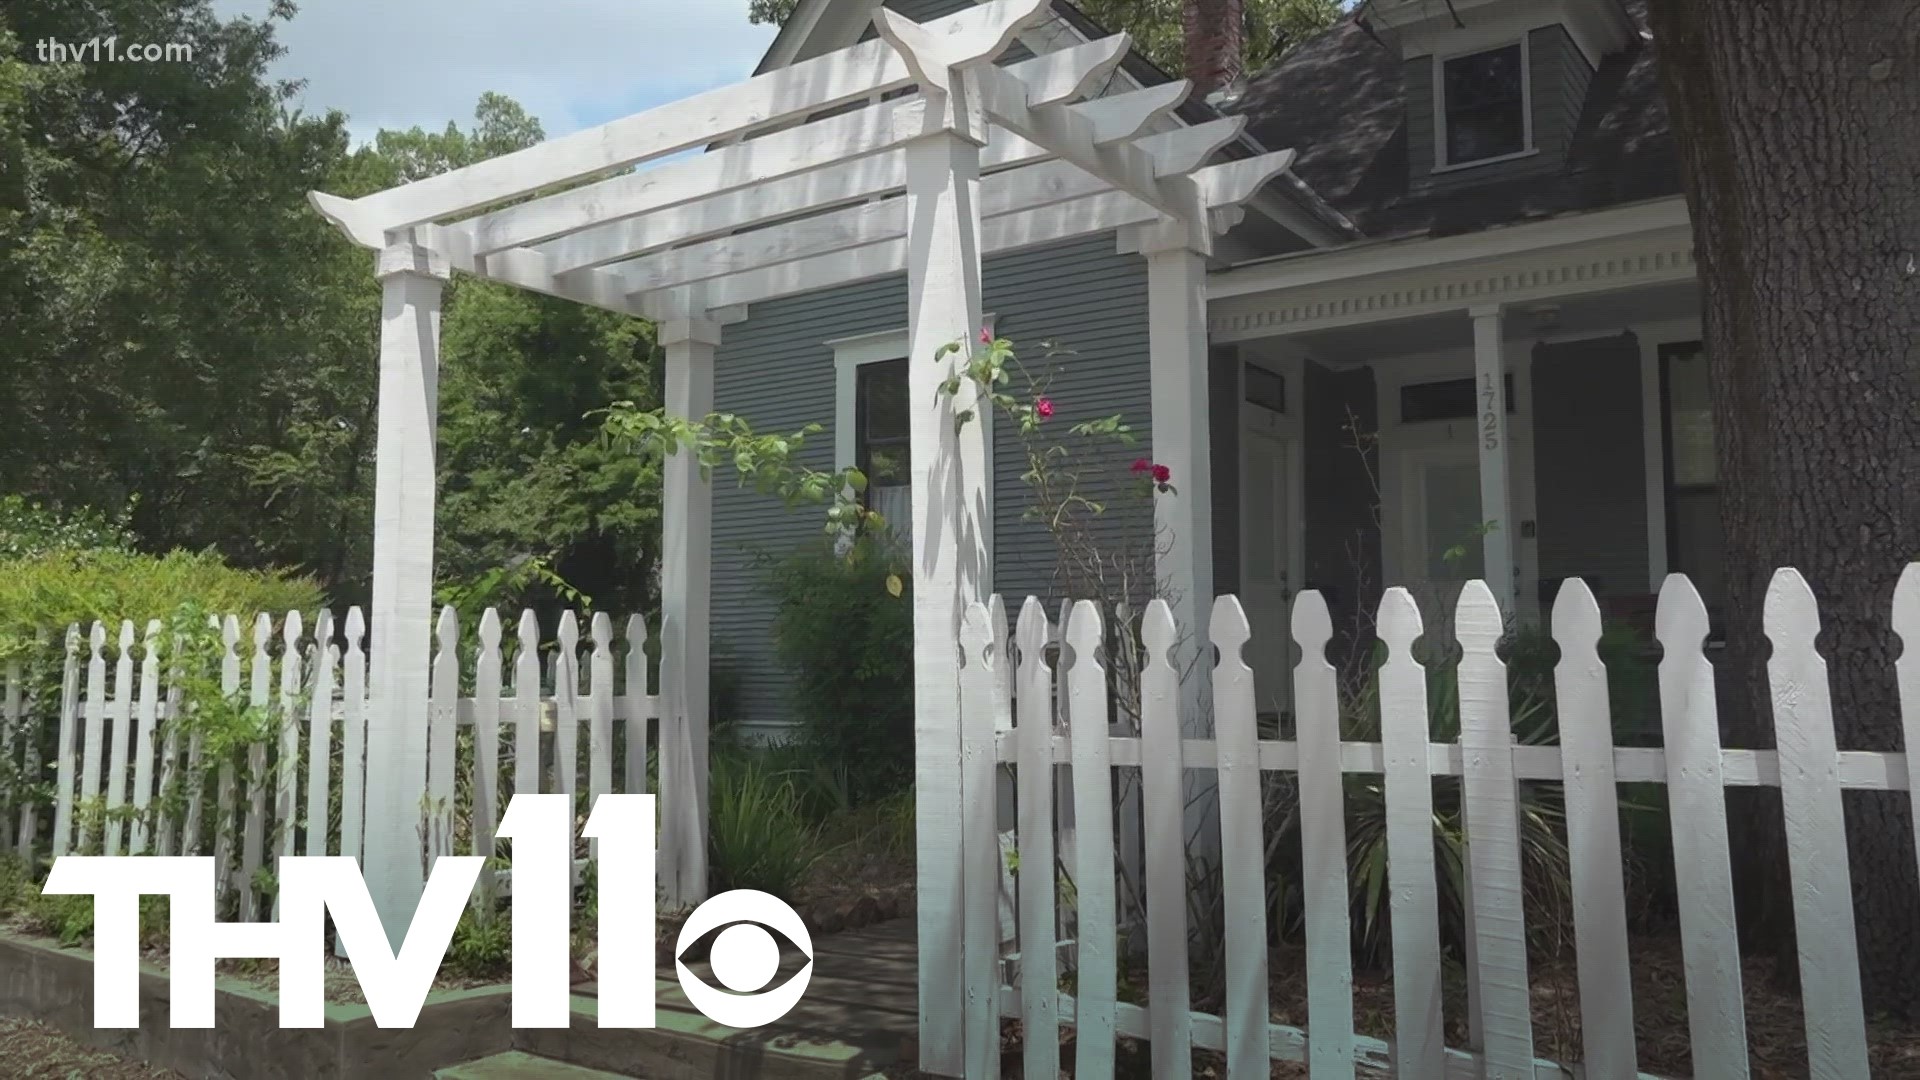 New regulations for short-term rentals, like an Airbnb, have been established in Little Rock. Here's the latest on the new rules and what it could mean for renters.